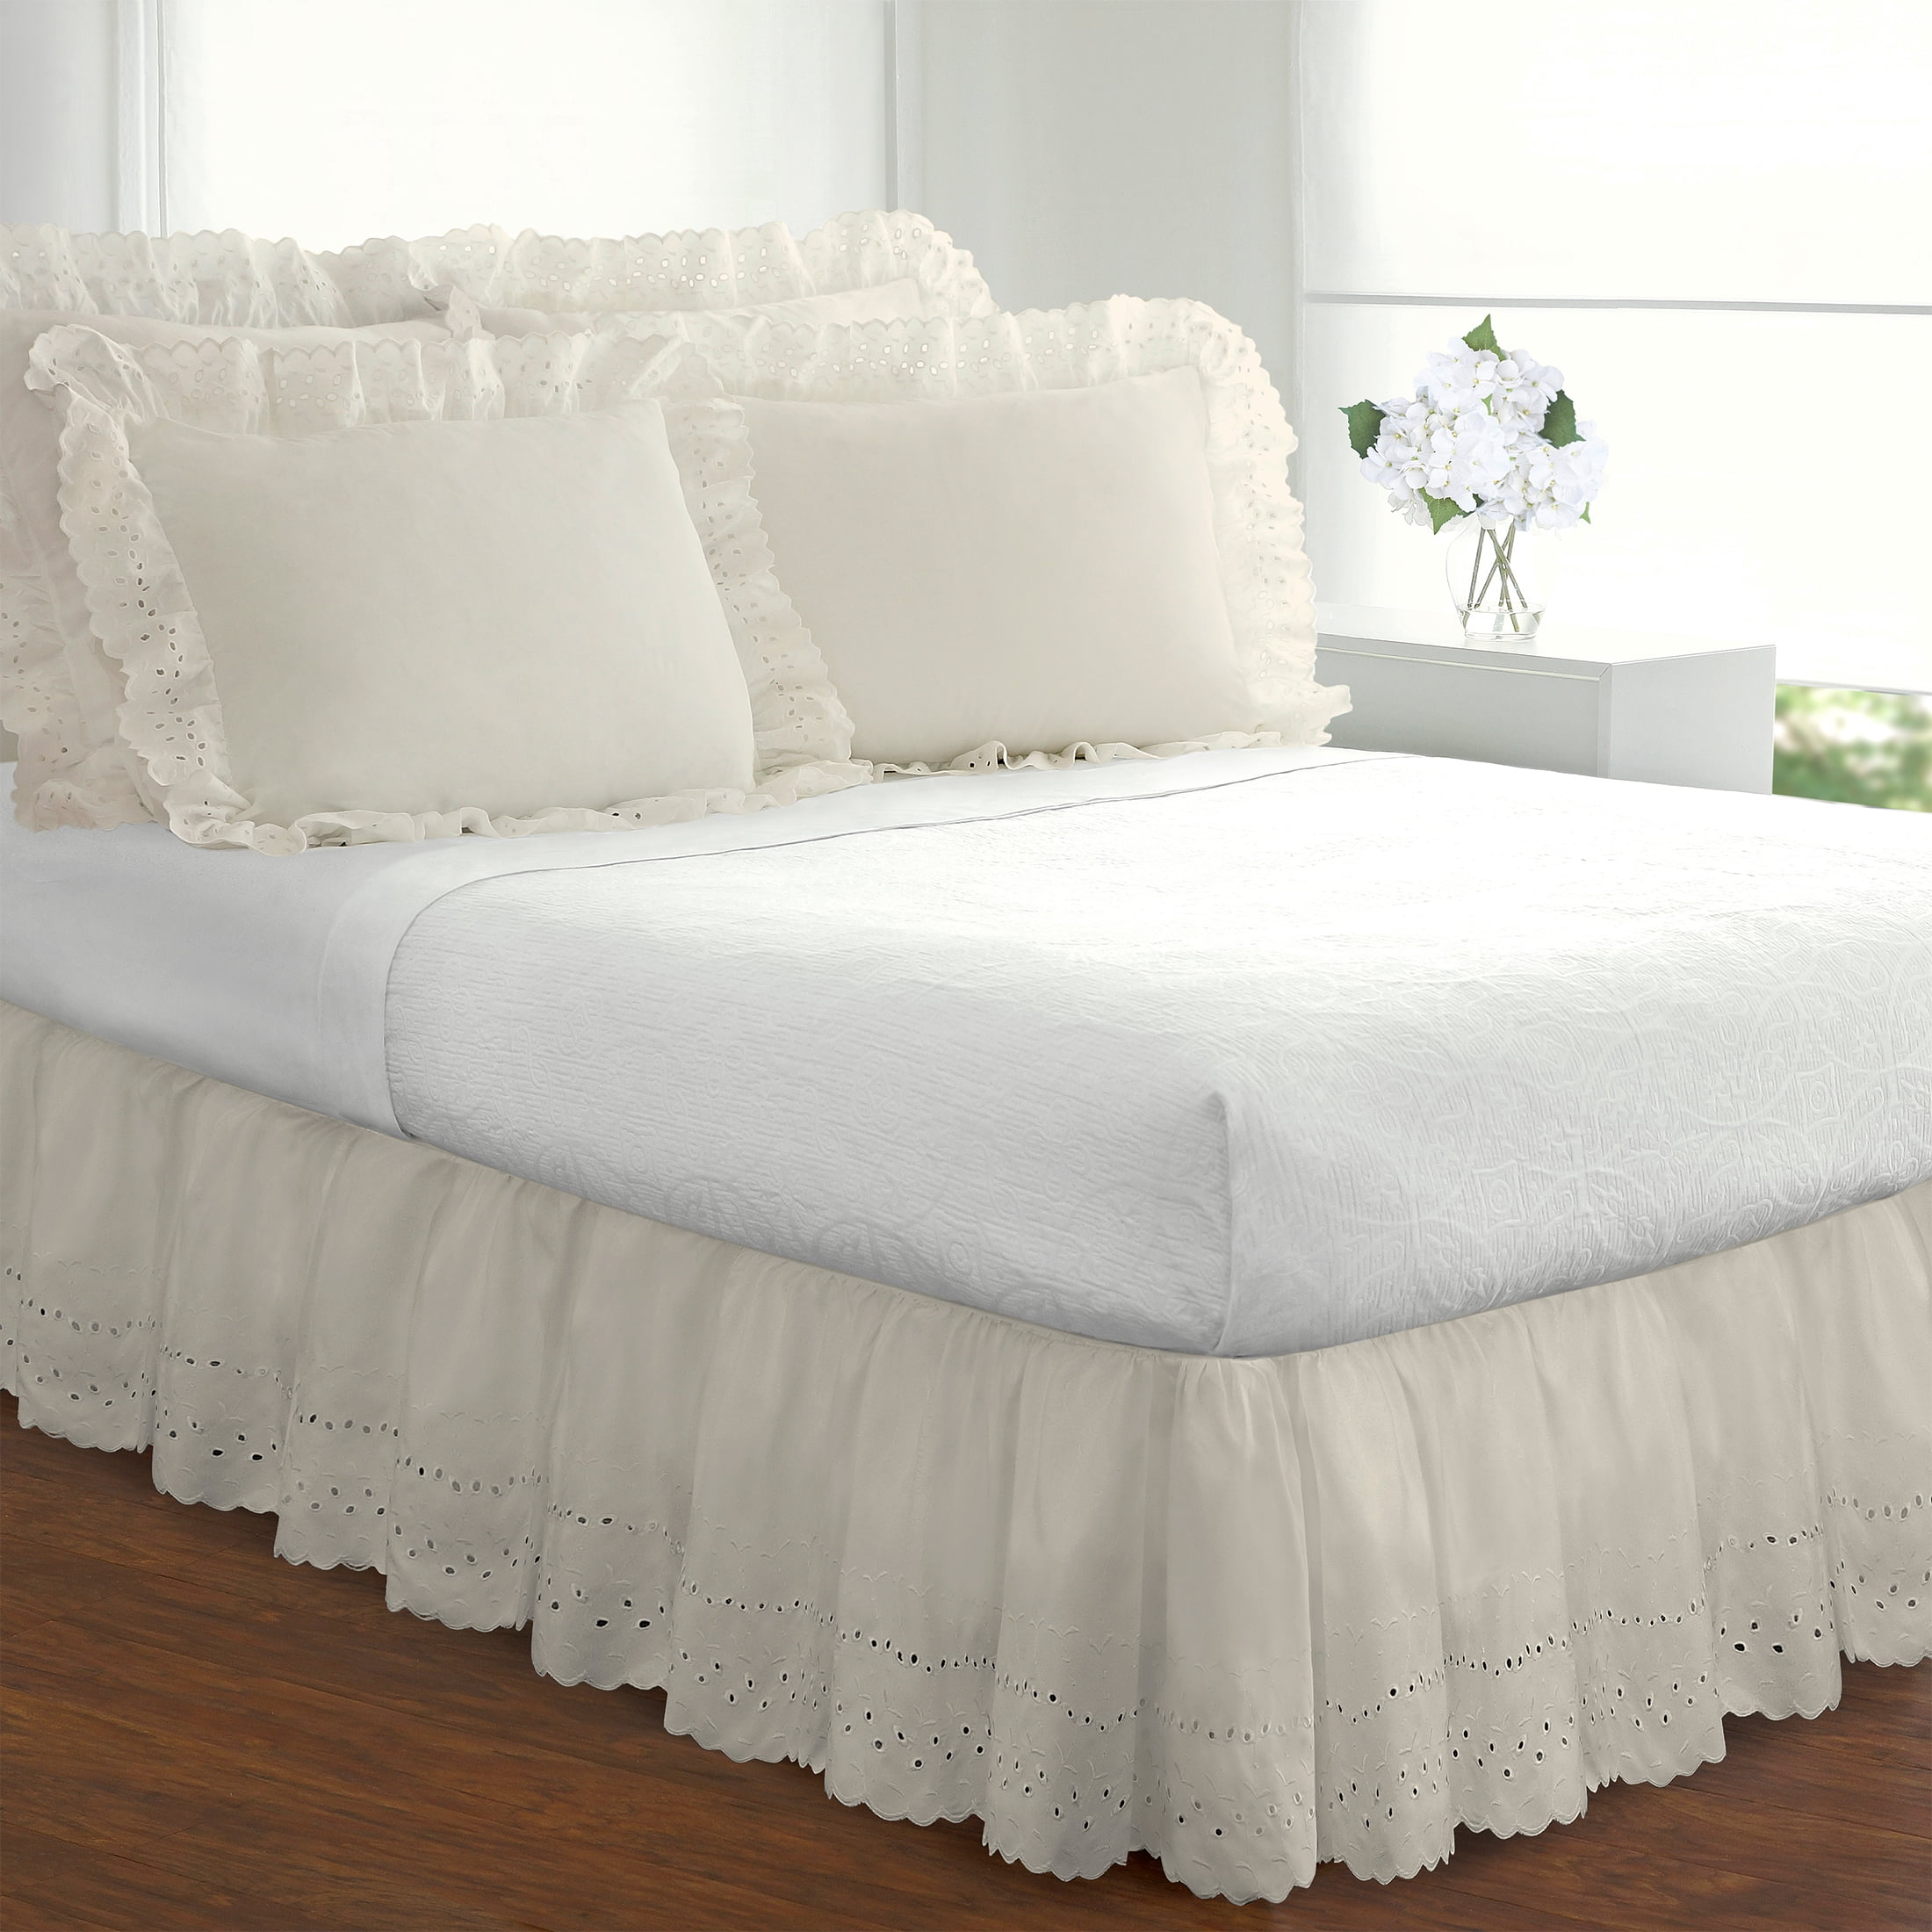 Quilted Bed Sheets Lace Bed Skirt Solid Color Bedspread Home Bedsheets Bed  Cover – WallBuilders